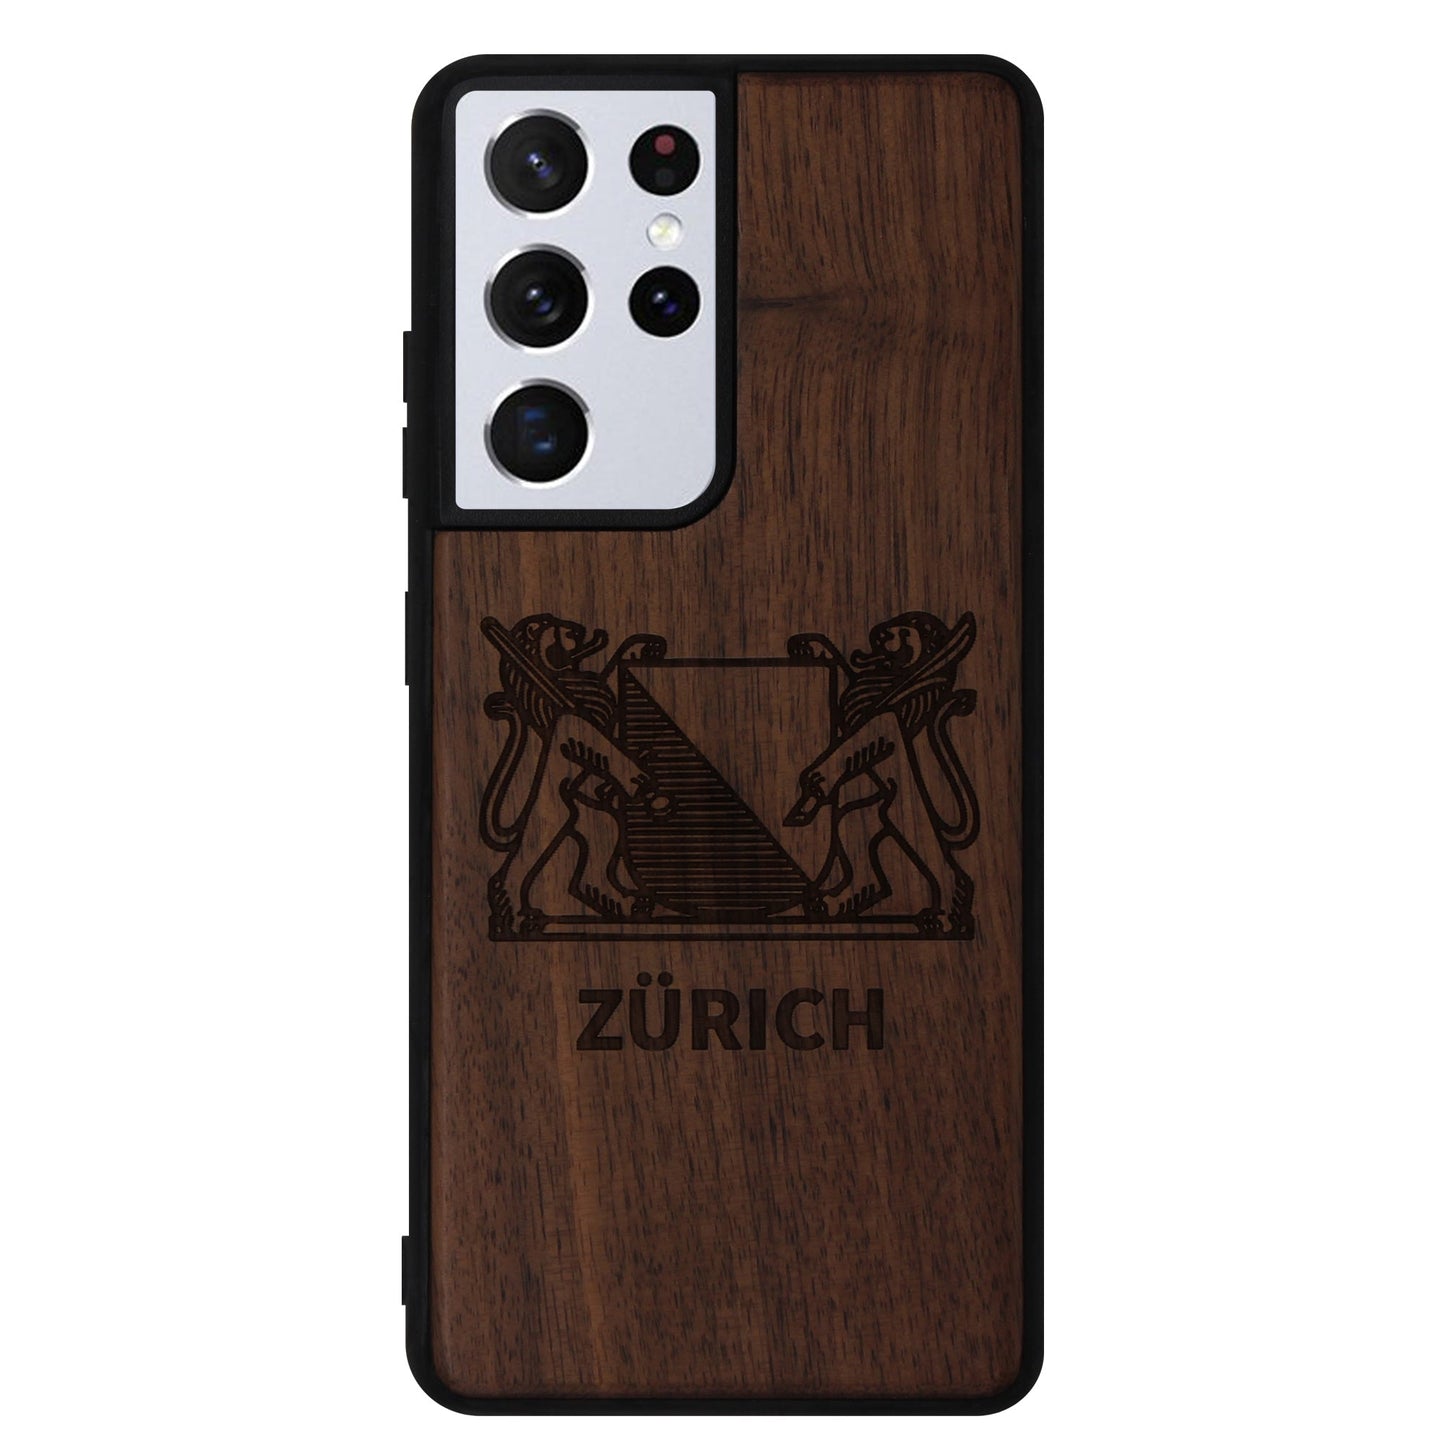 Zurich Coat of Arms Eden Case made of walnut wood for Samsung Galaxy S21 Ultra